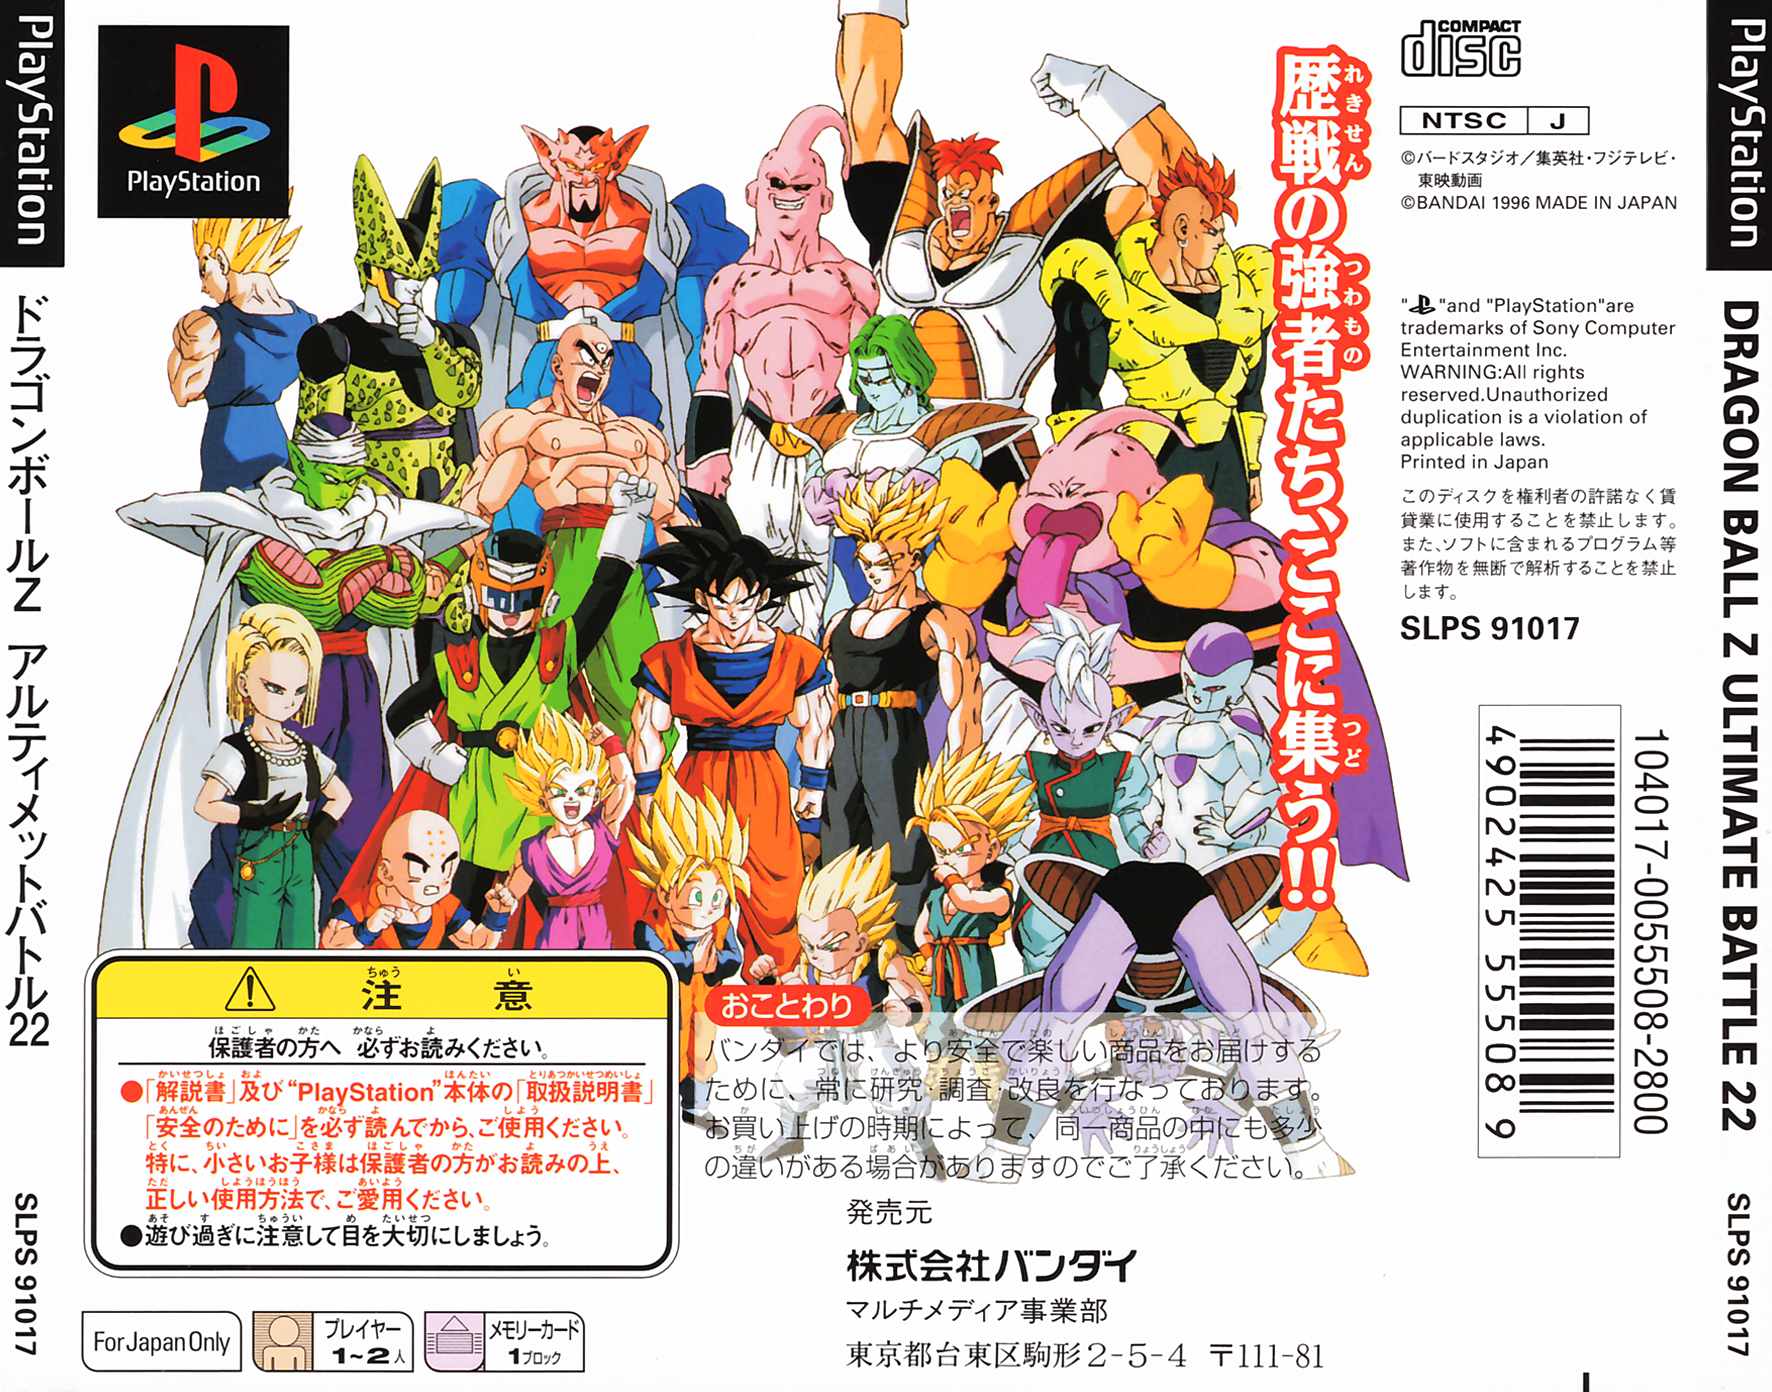 Uzivatel Studio Ozkai D R E A D Na Twitteru More Ps1 Cover Scanning Cuz Why Not I Have The 3 Dragon Ball Games Released For The Ps1 In Japan All Playstation The Best Versions But